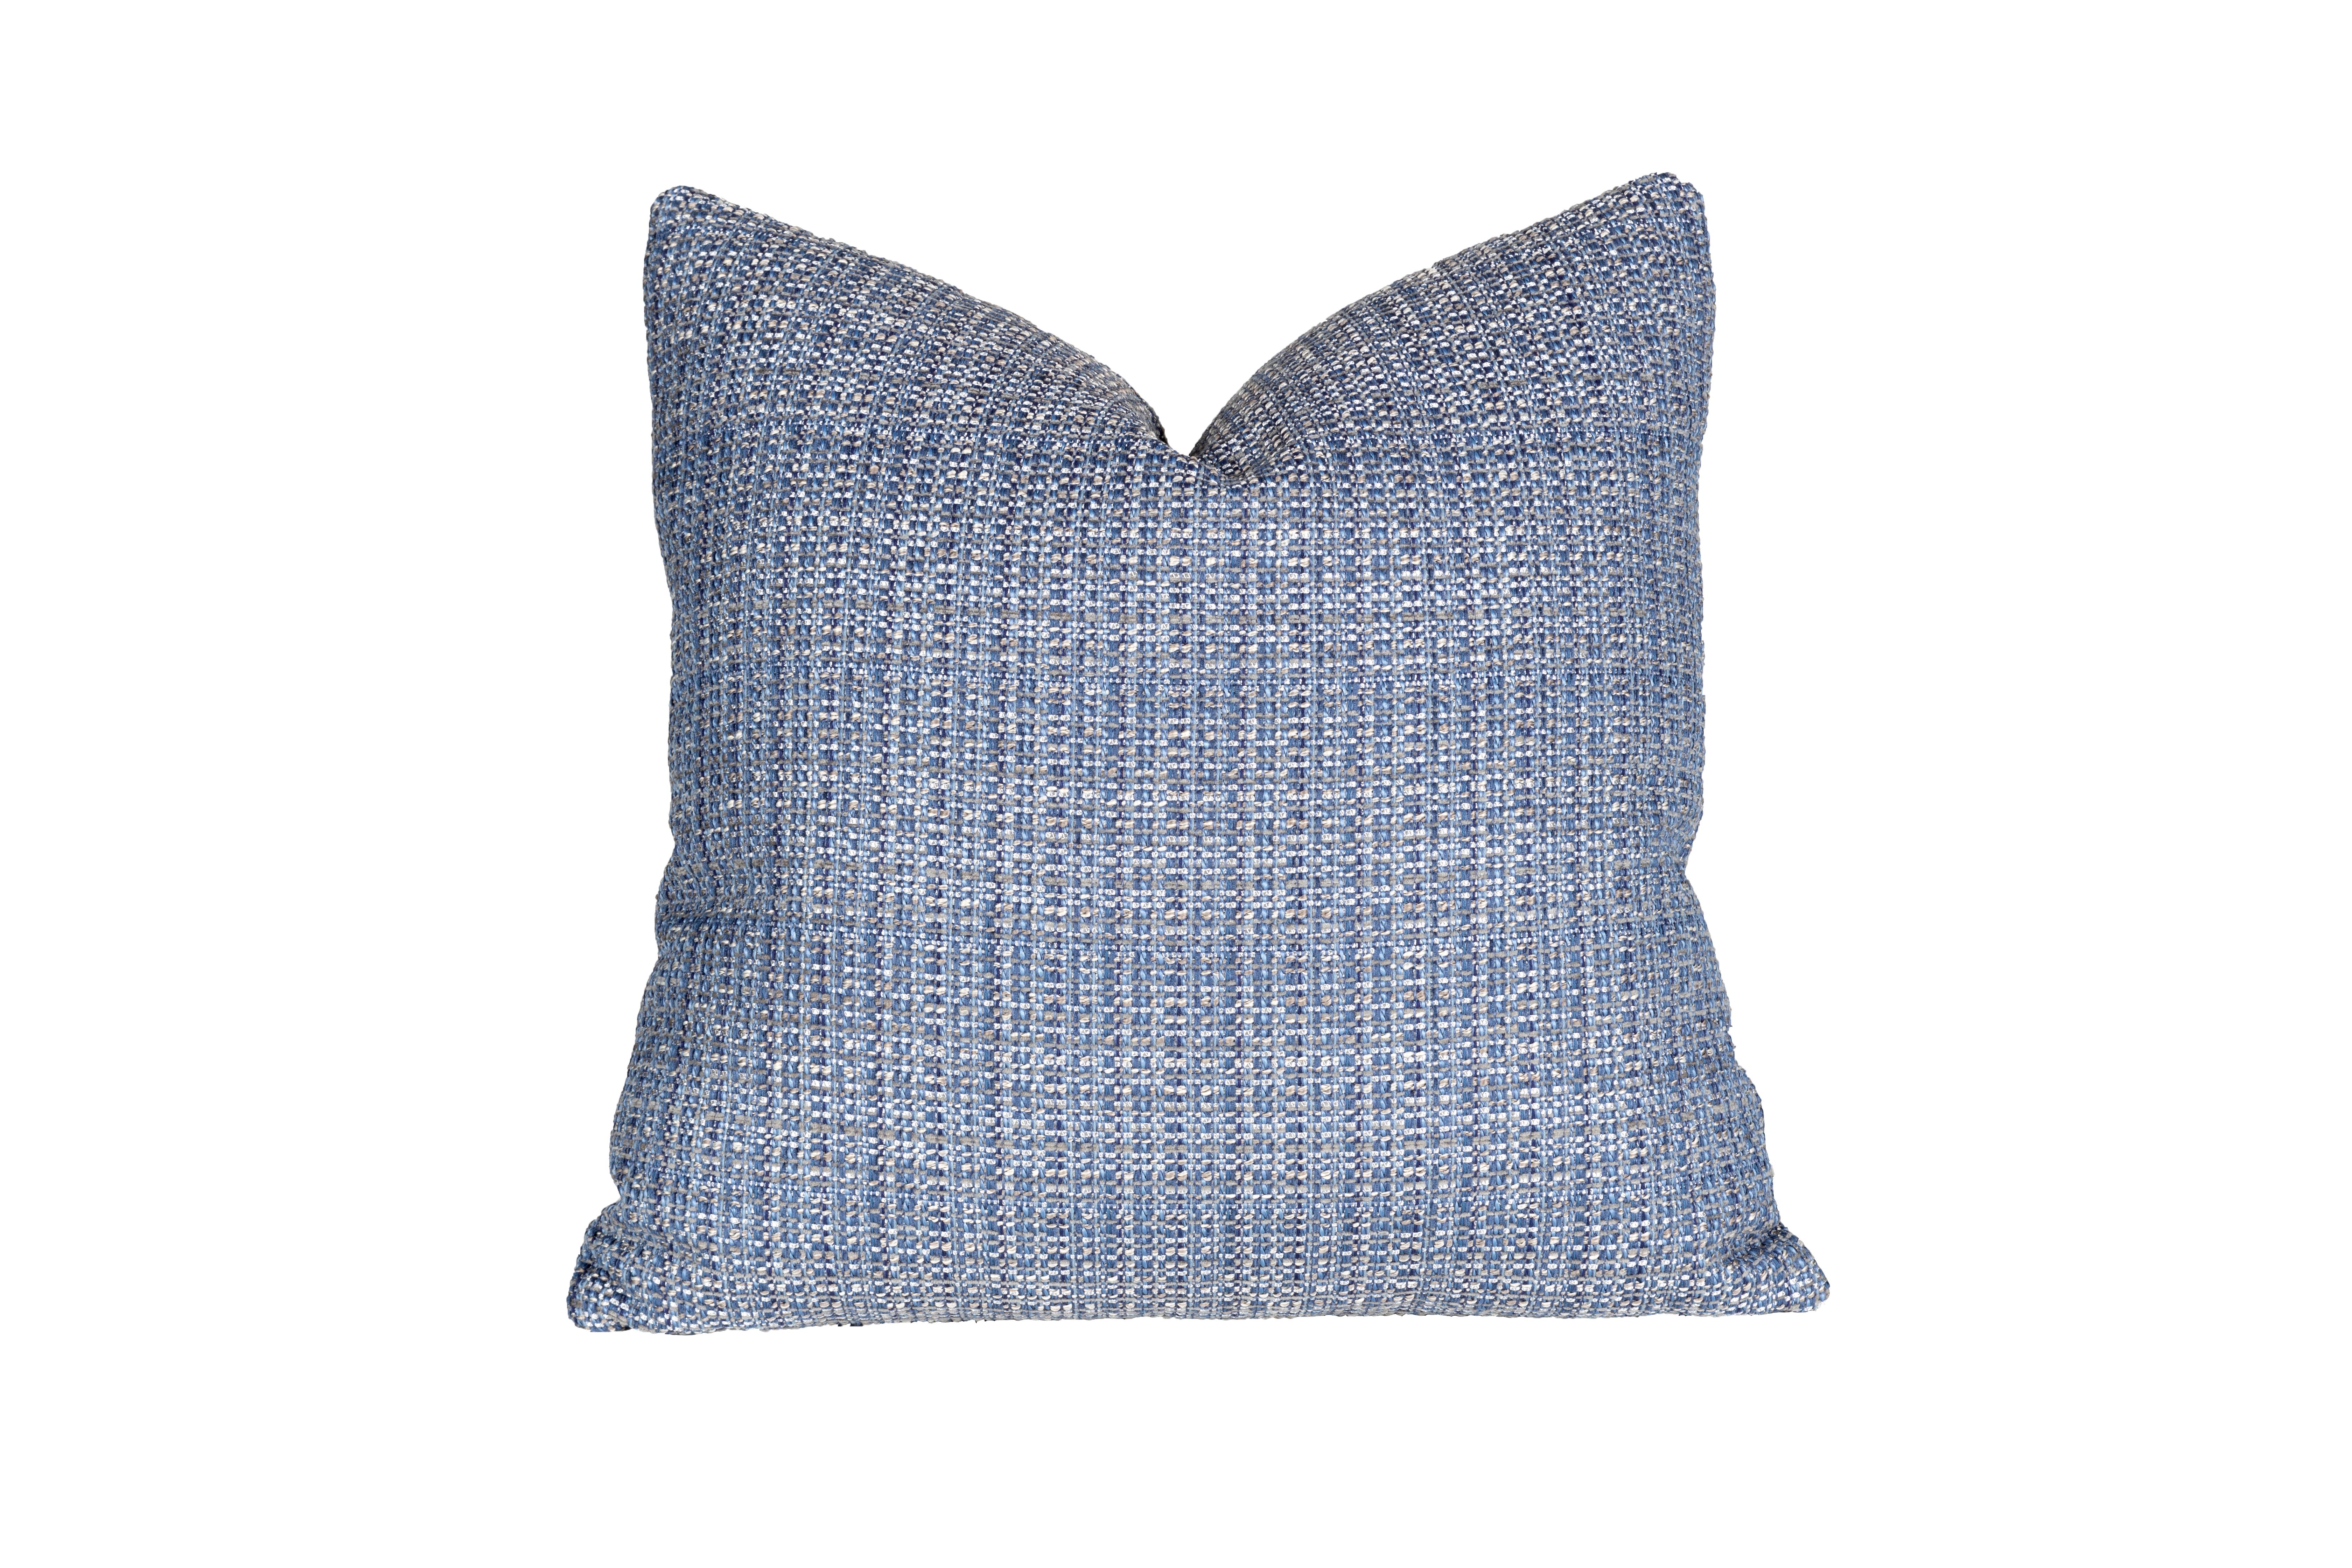 Our down pillows are made with vintage tweed, providing a luxuriously textured accent to your space. Measured 22